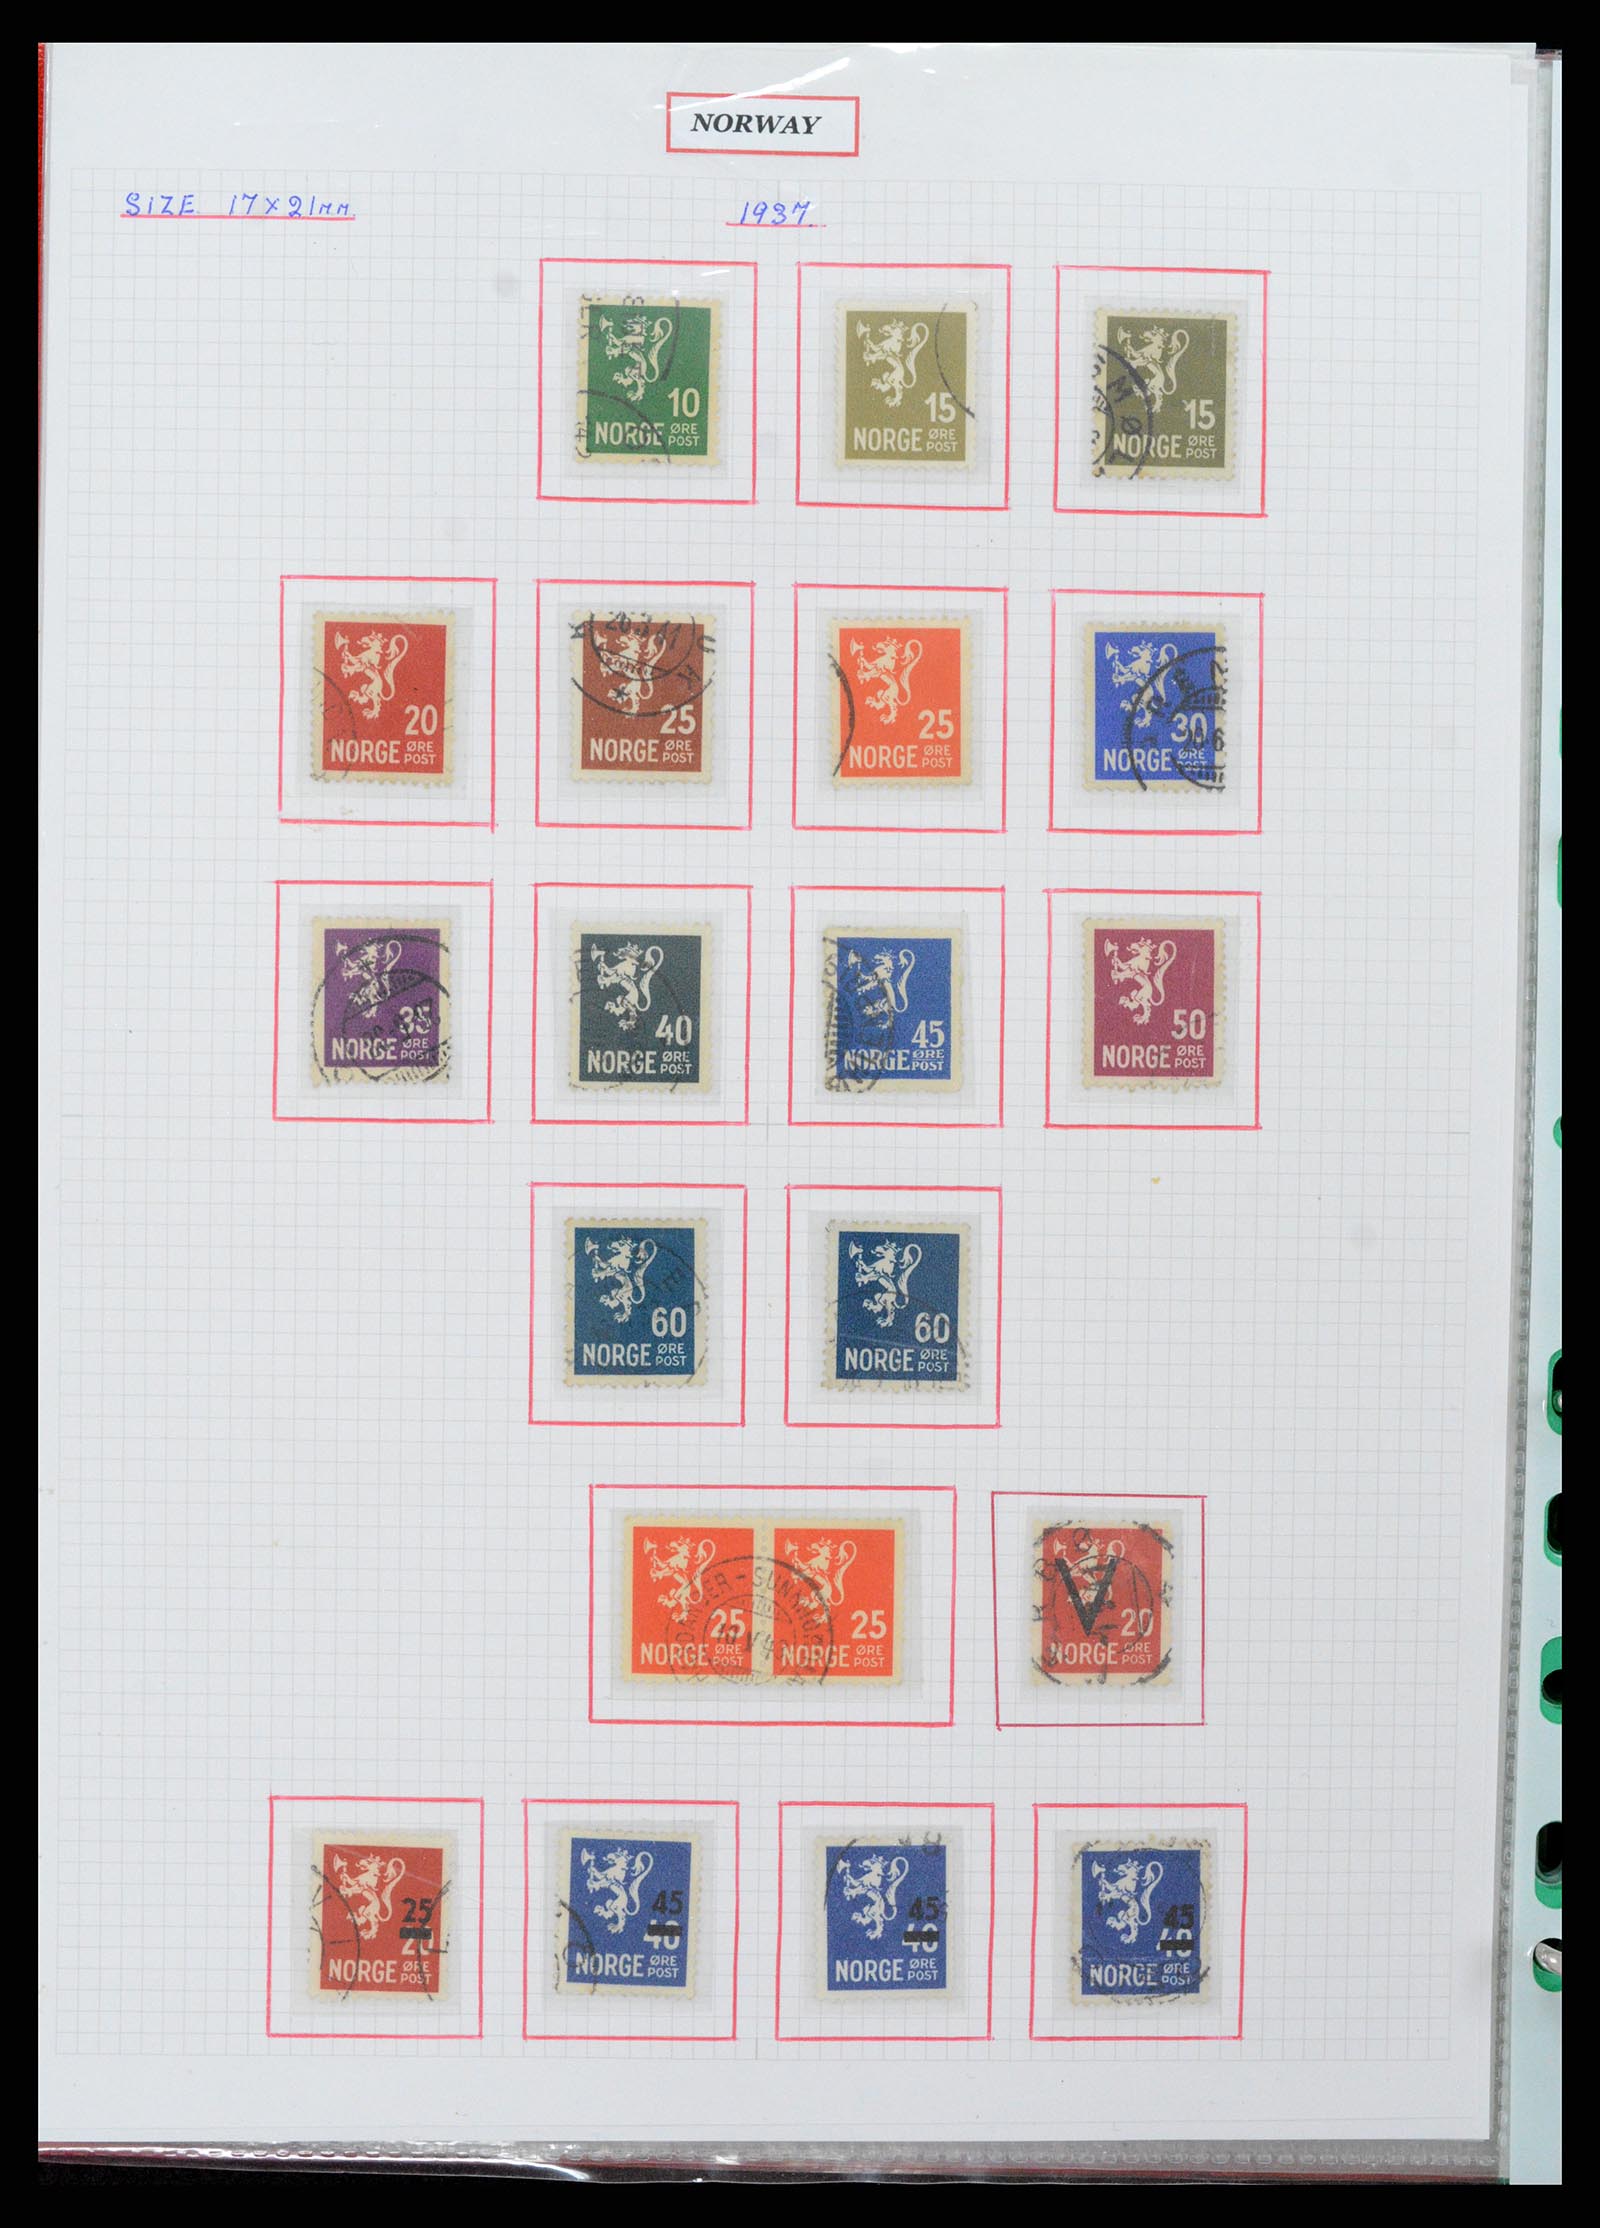 37344 038 - Stamp collection 37344 European countries 1861-1980.